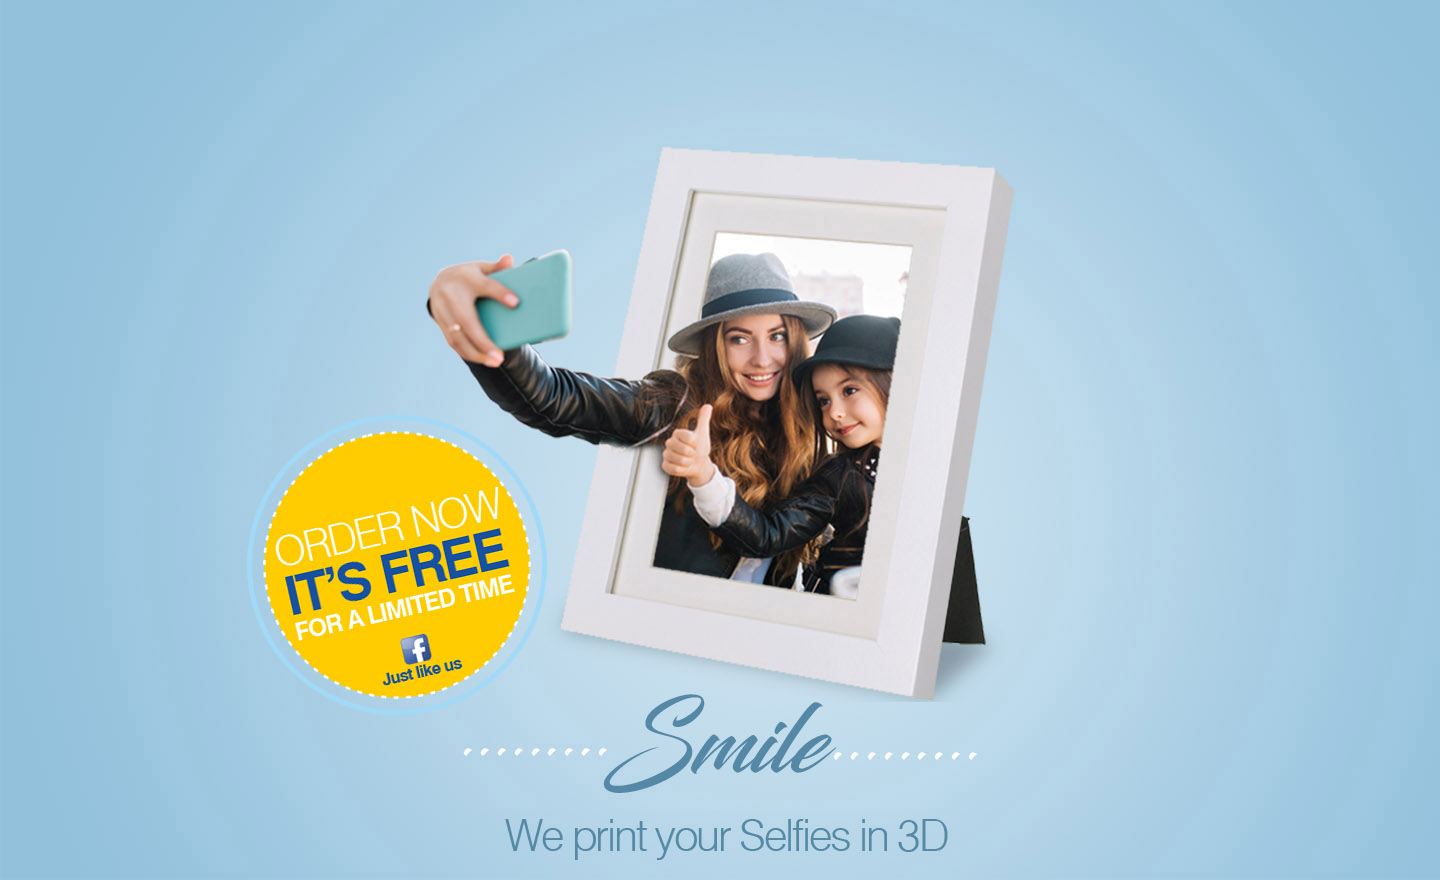 Turn your selfie into an amazing 3D lenticular picture. It's FREE for a limited time.